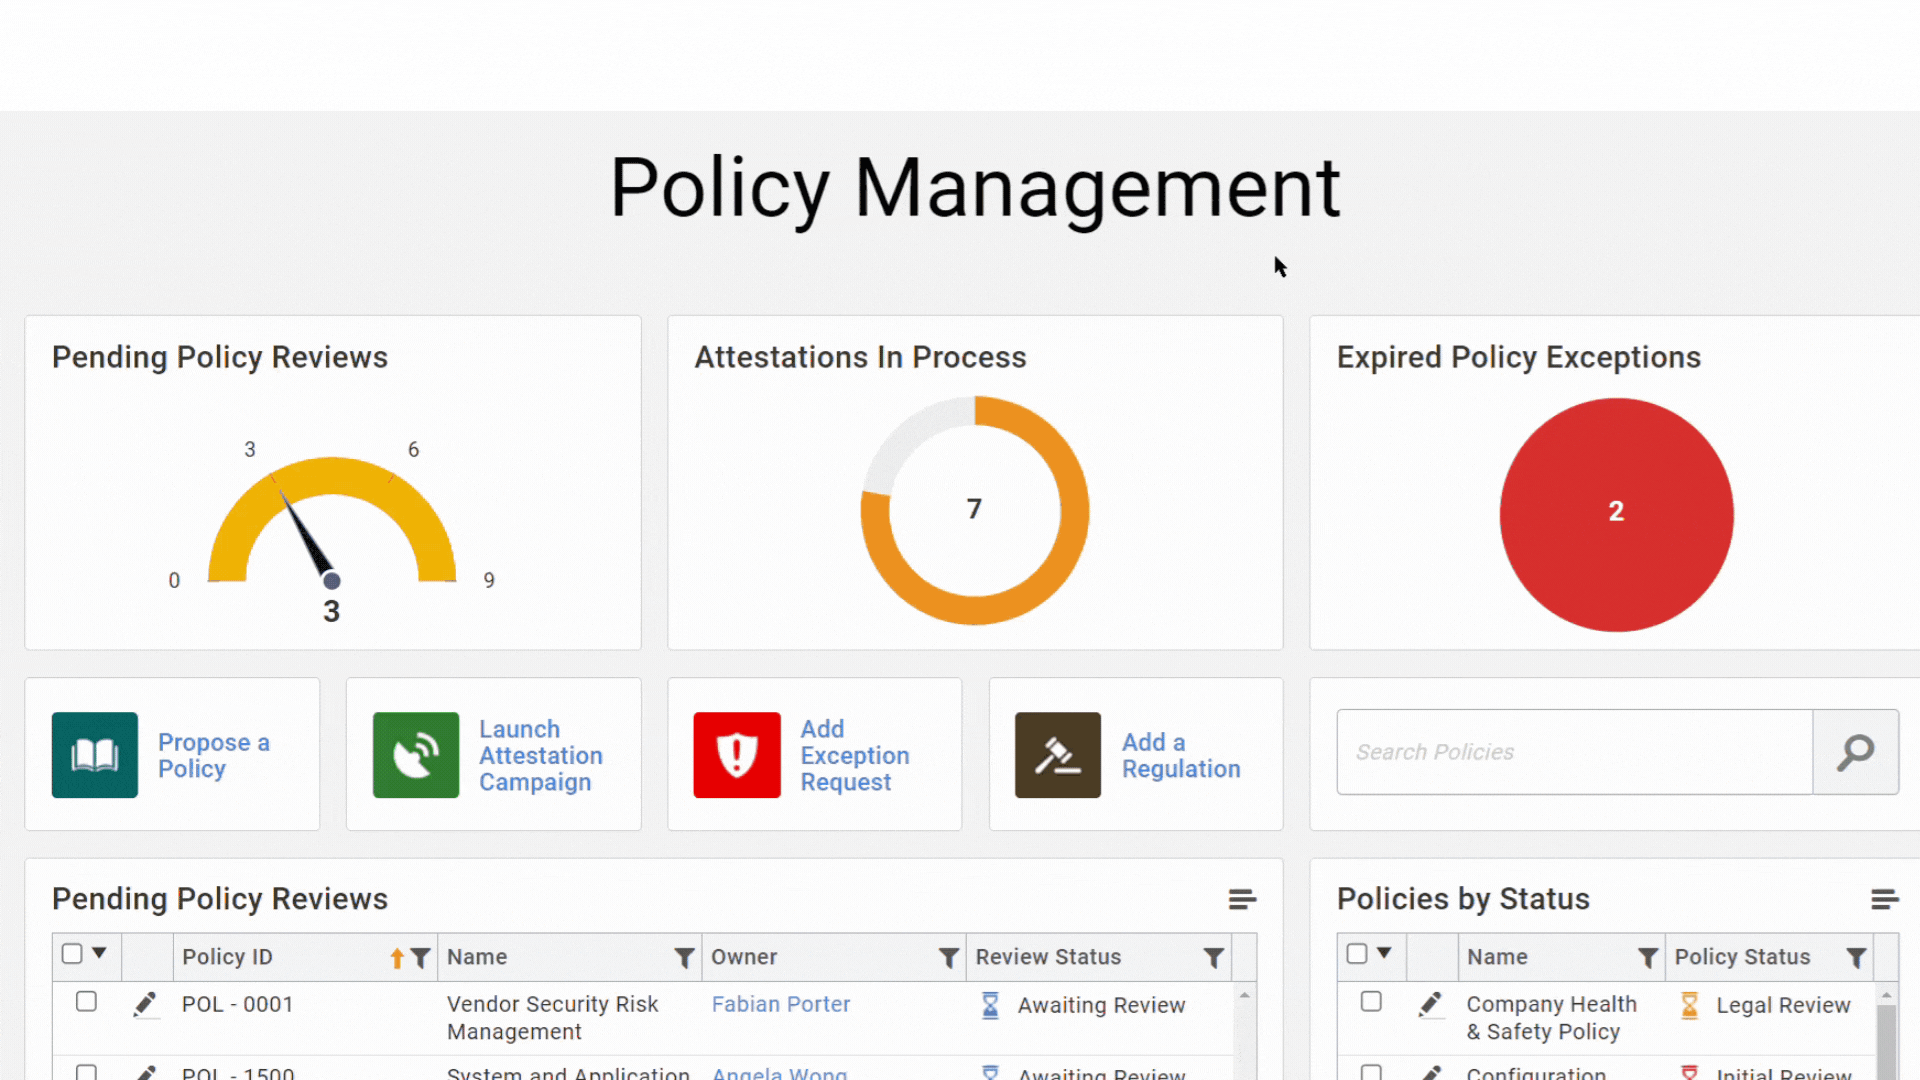 Policy Management Reporting in Onspring